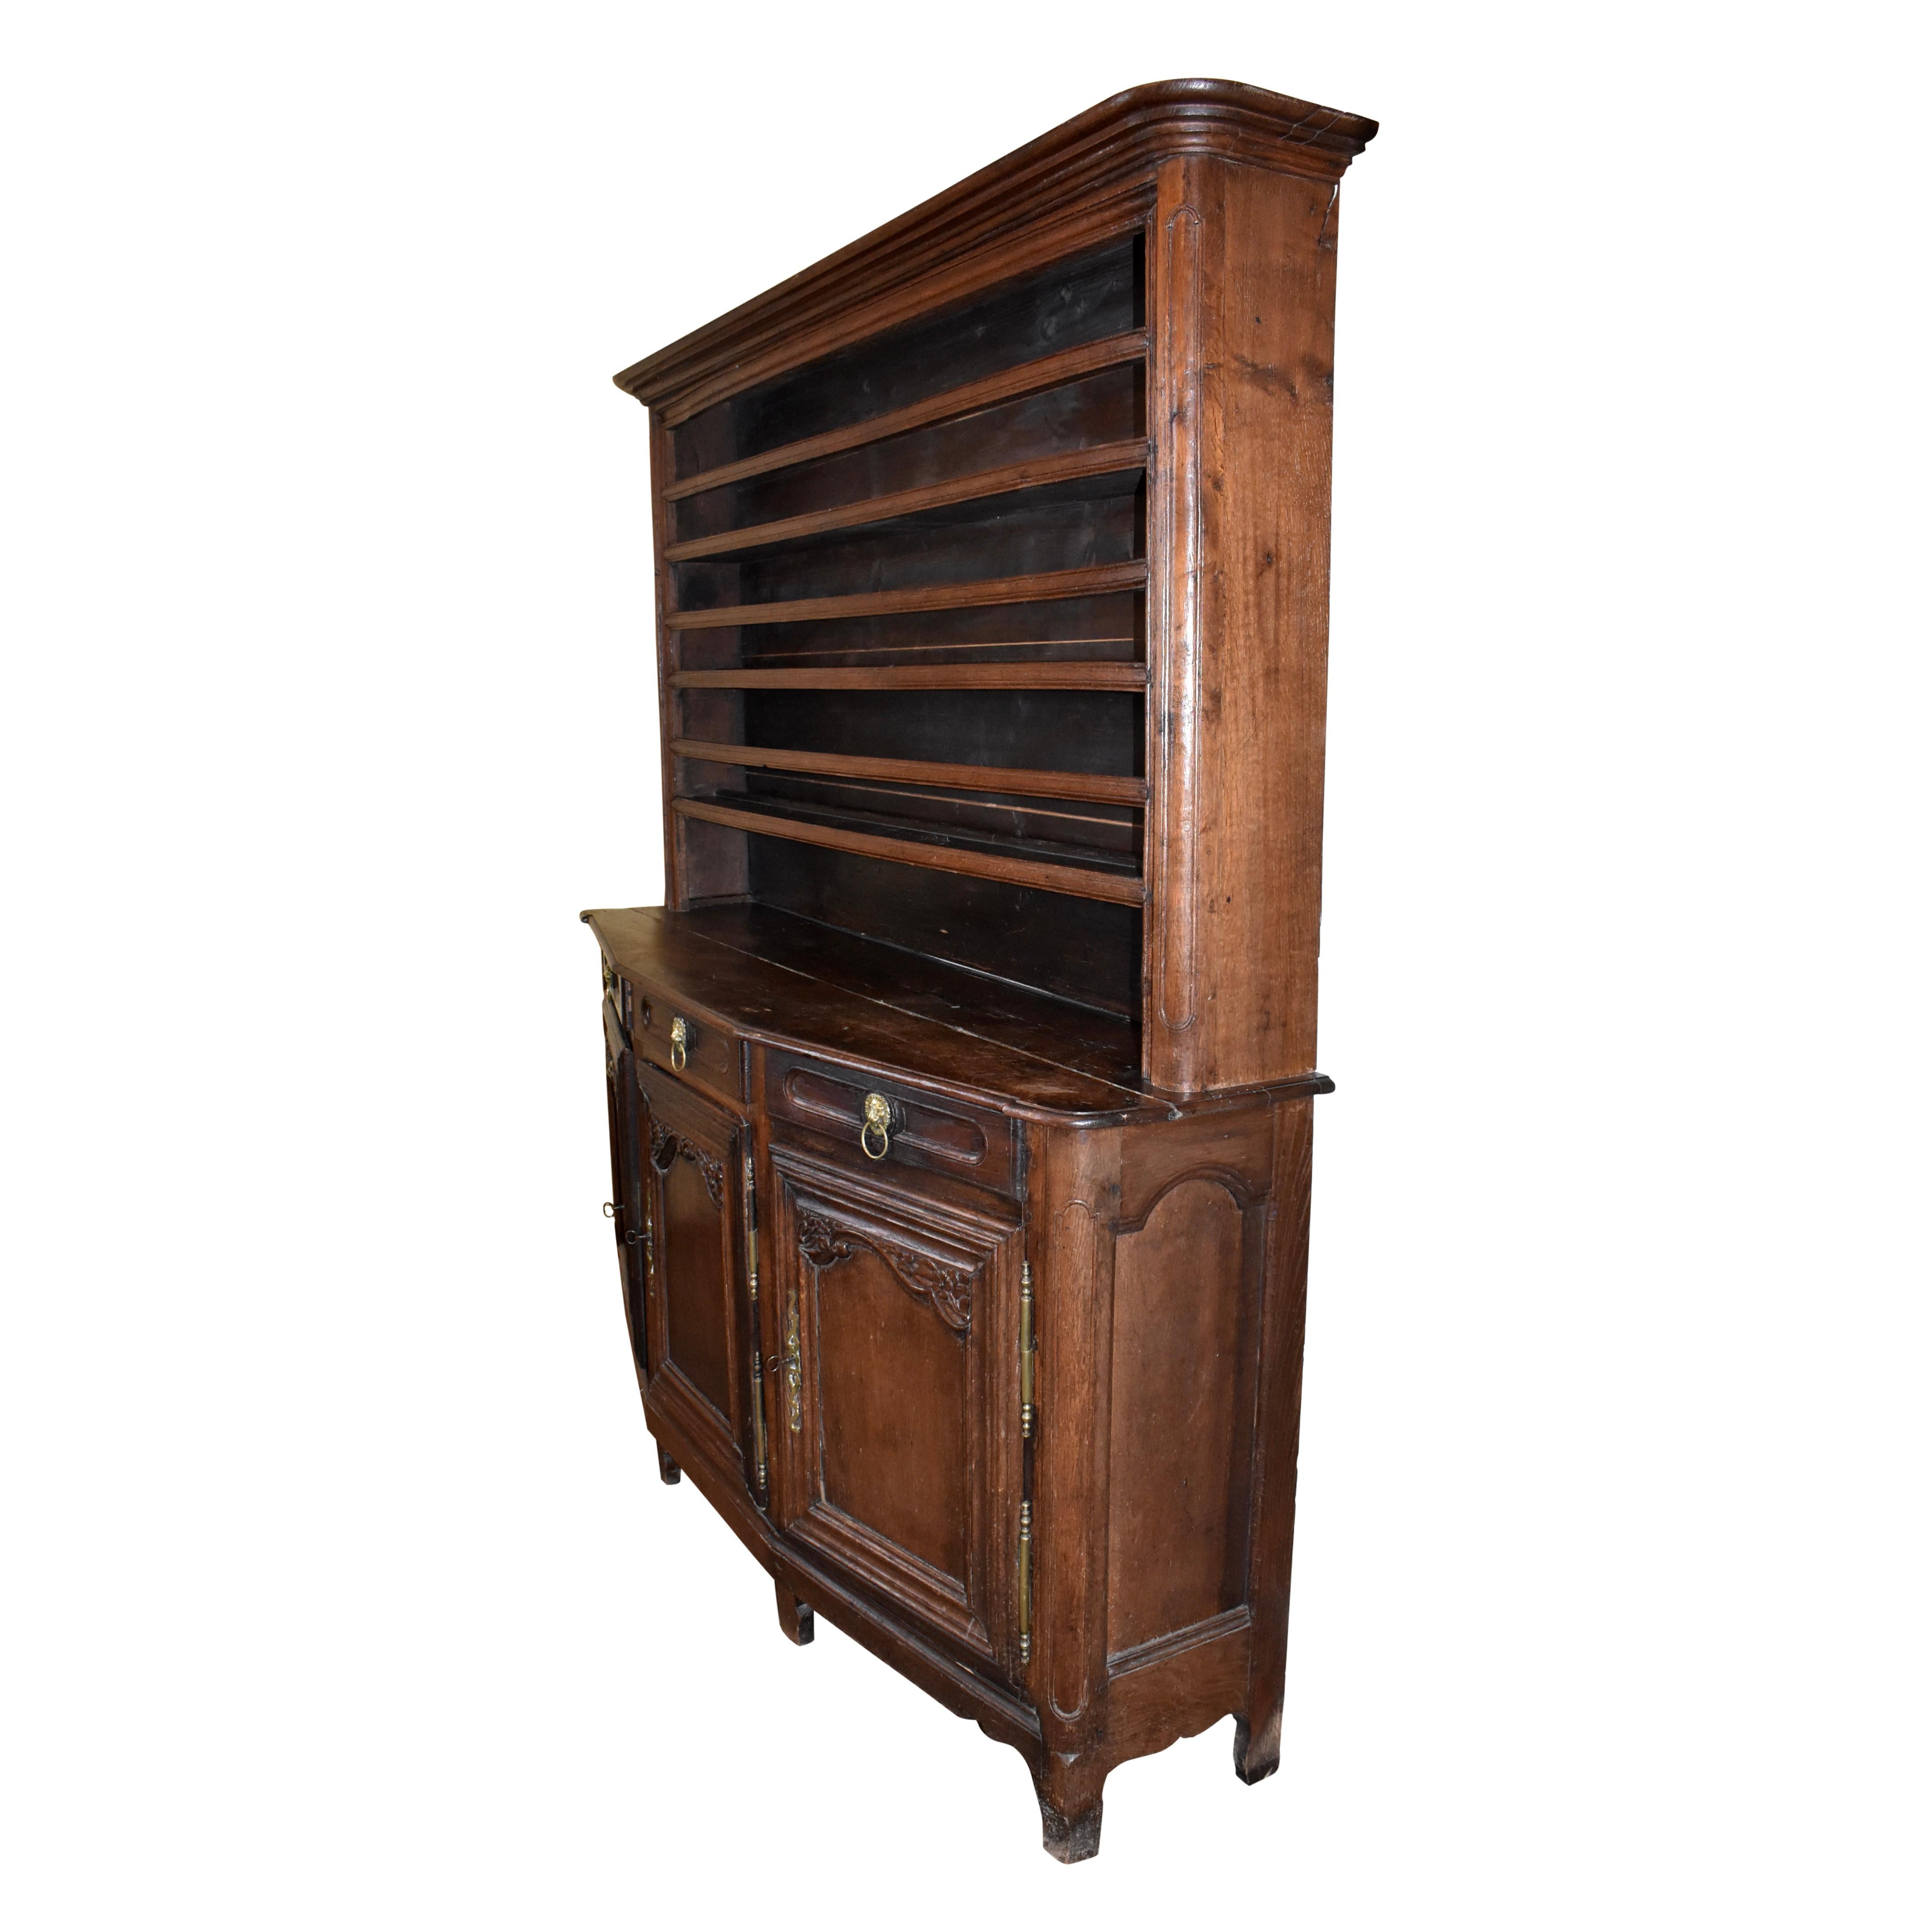 Bring rustic, Old World charm to any room with this substantial plate cupboard. Crafted in the late-19th century, it has an oak front and pine backboard, which are finished with a rich, dark stain. The cupboard is comprised of an upper hutch that